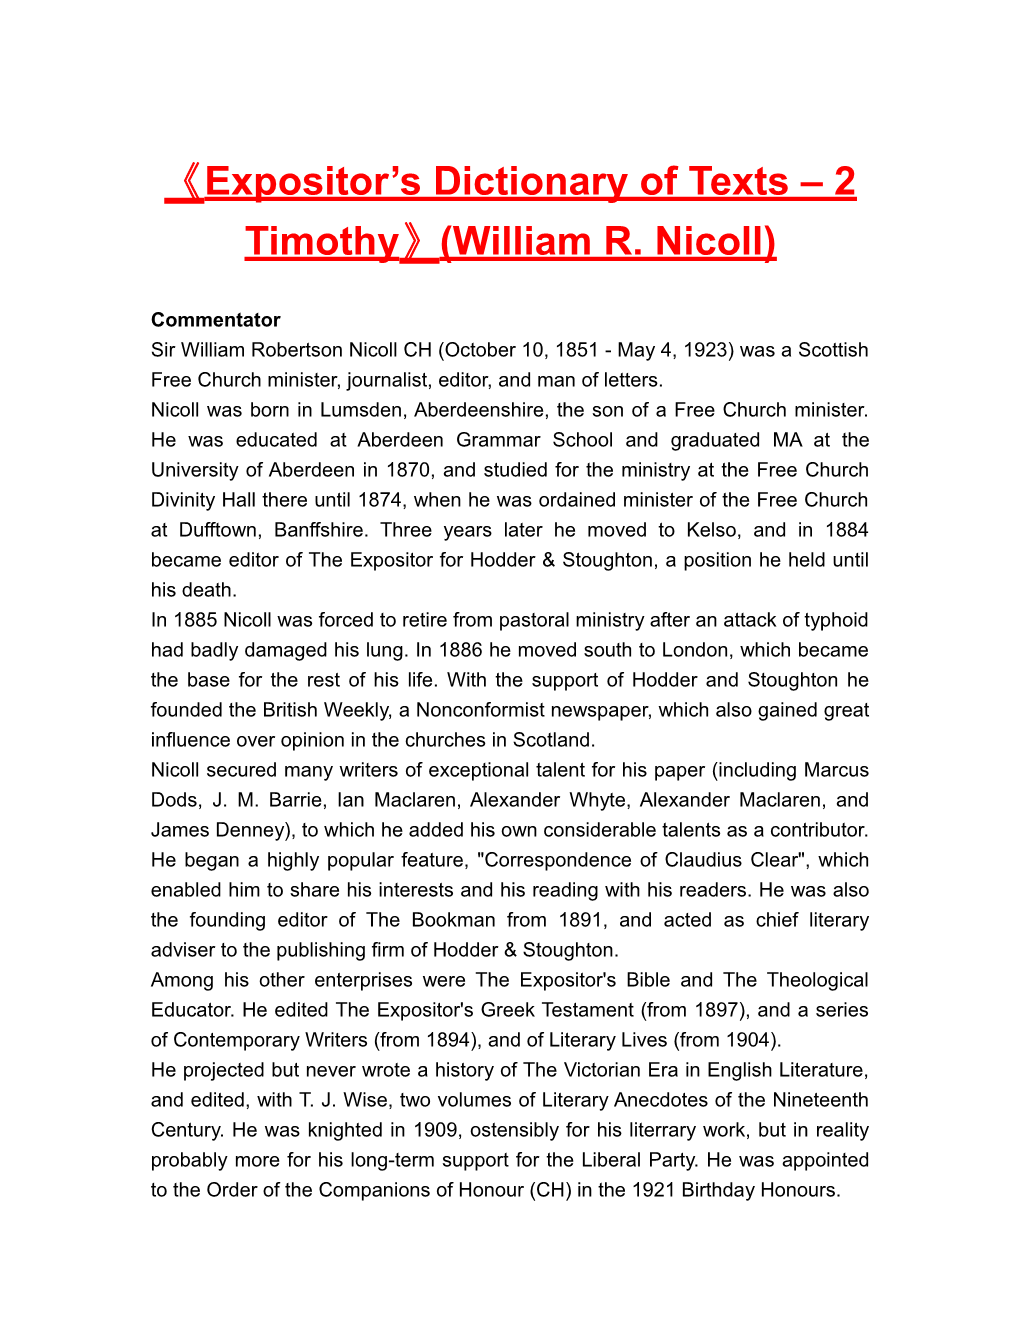 Expositor S Dictionaryof Texts 2 Timothy (William R. Nicoll)